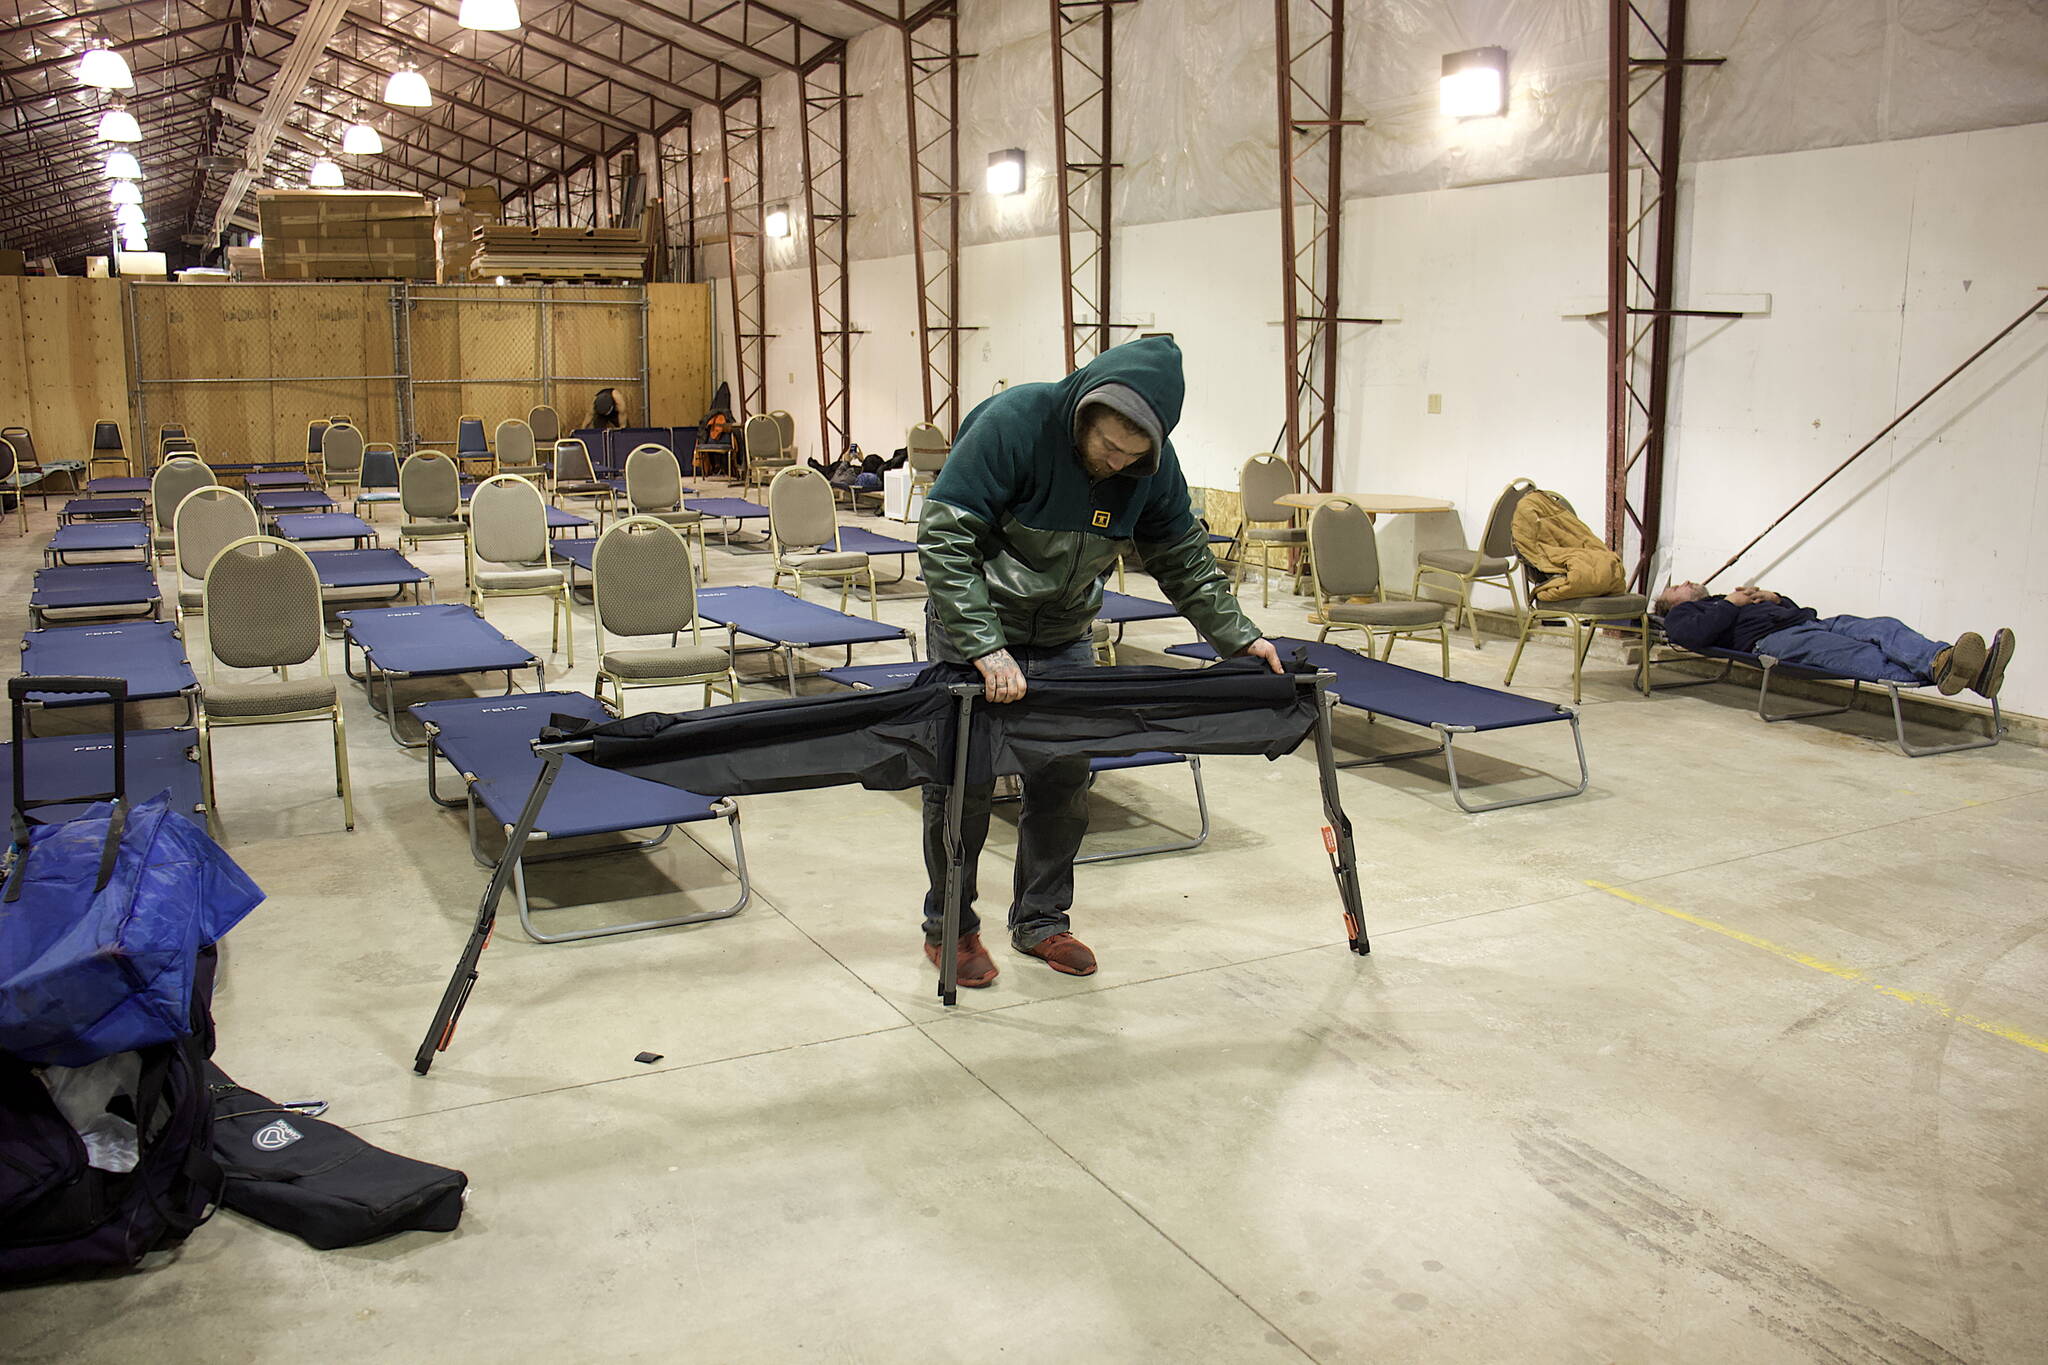 Kevin Jainese sets up his cot along the 40 already provided by staff at the city’s new cold weather emergency shelter at a warehouse in Thane on Friday night, the first for the new facility. (Mark Sabbatini / Juneau Empire)